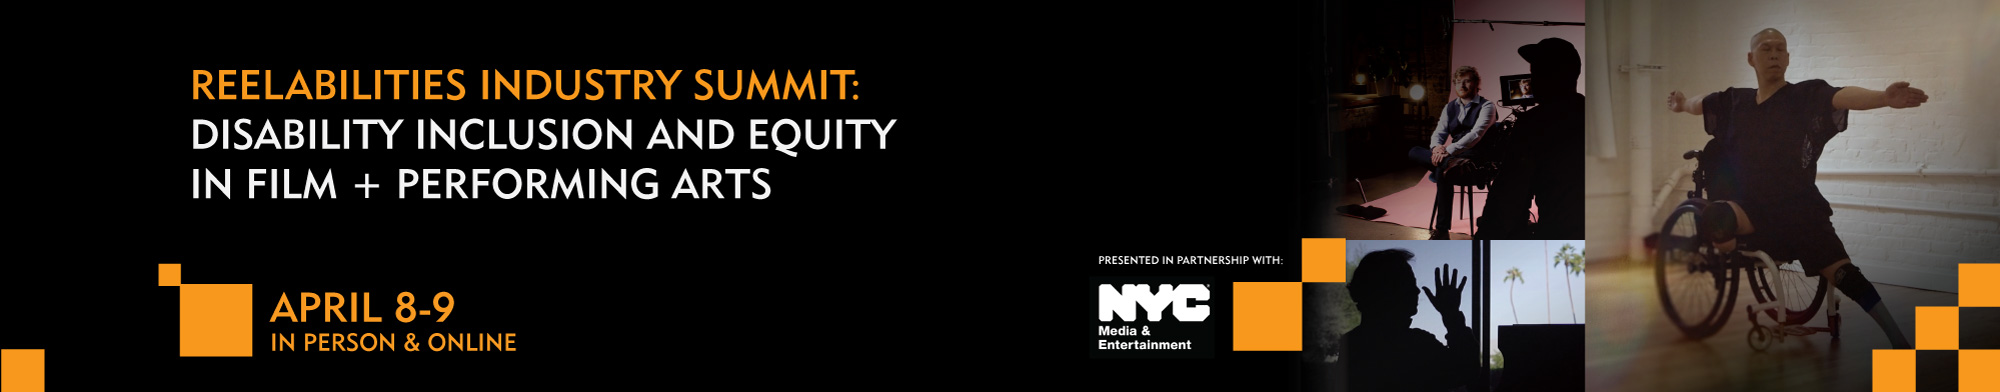 ReelAbilities Industry Summit: Disability Inclusion and Equity in Film + Arts. April 8-9. In person+ online. Presented in partnership with NYC Media and Entertainment